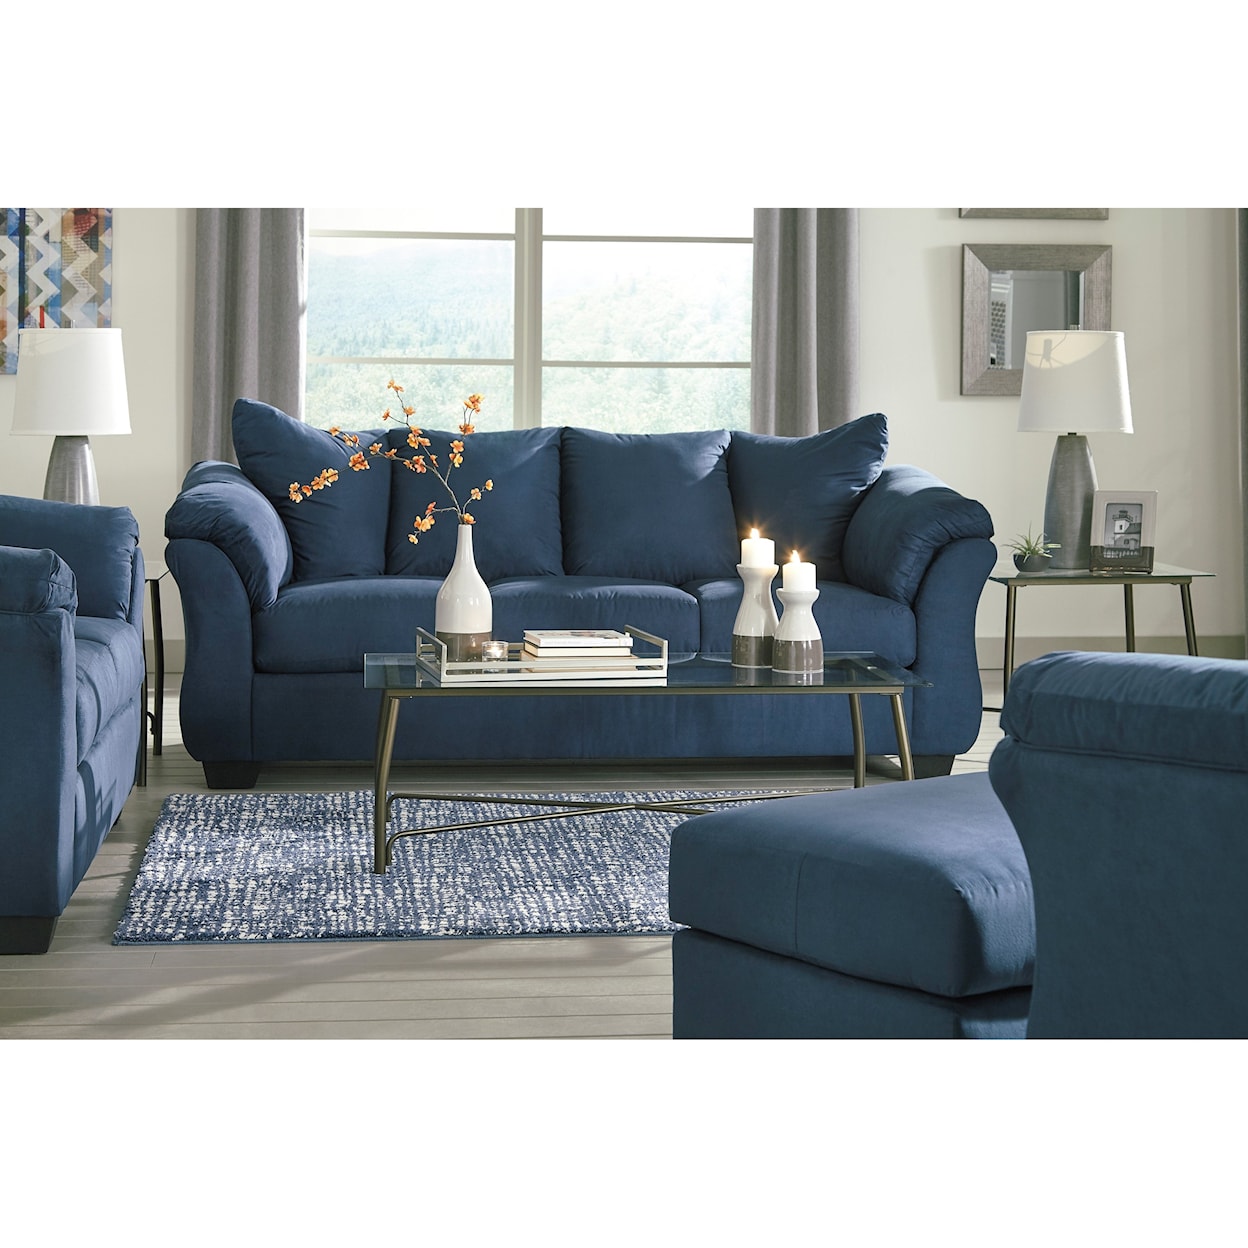 Benchcraft Darcy Upholstered Chair and Ottoman